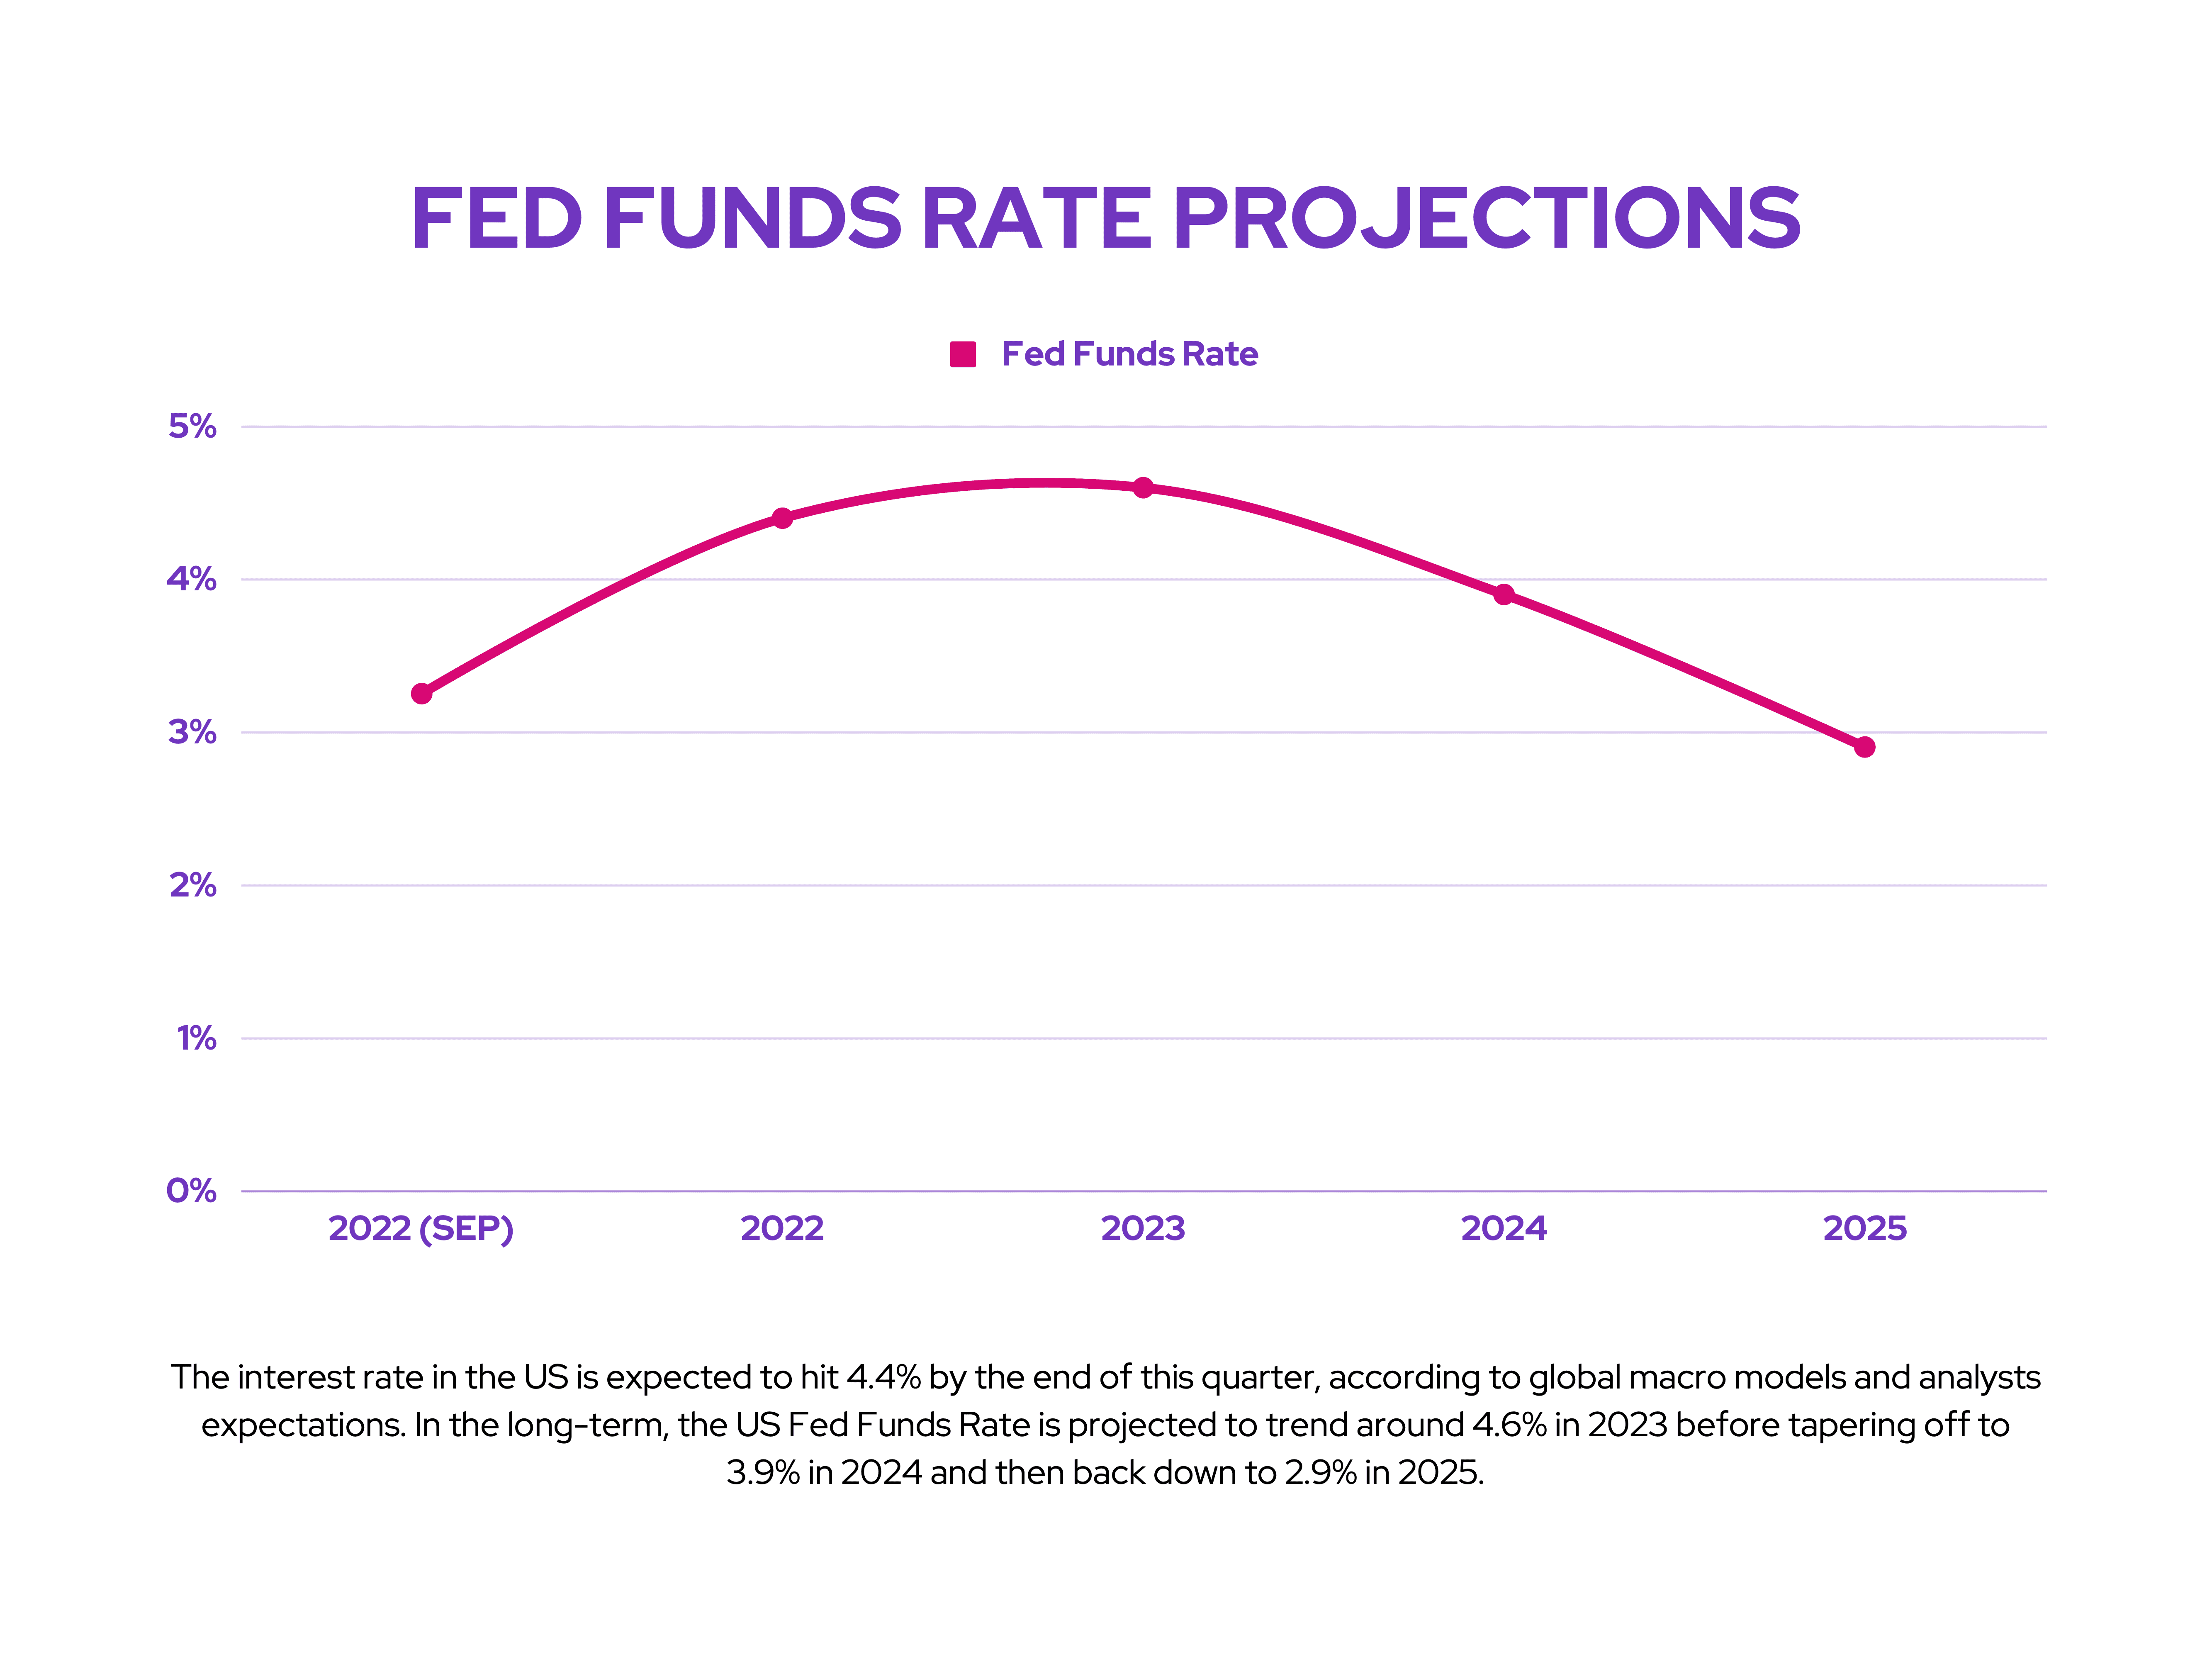 Scottish Mortgage: Fed Funds Rate Projections